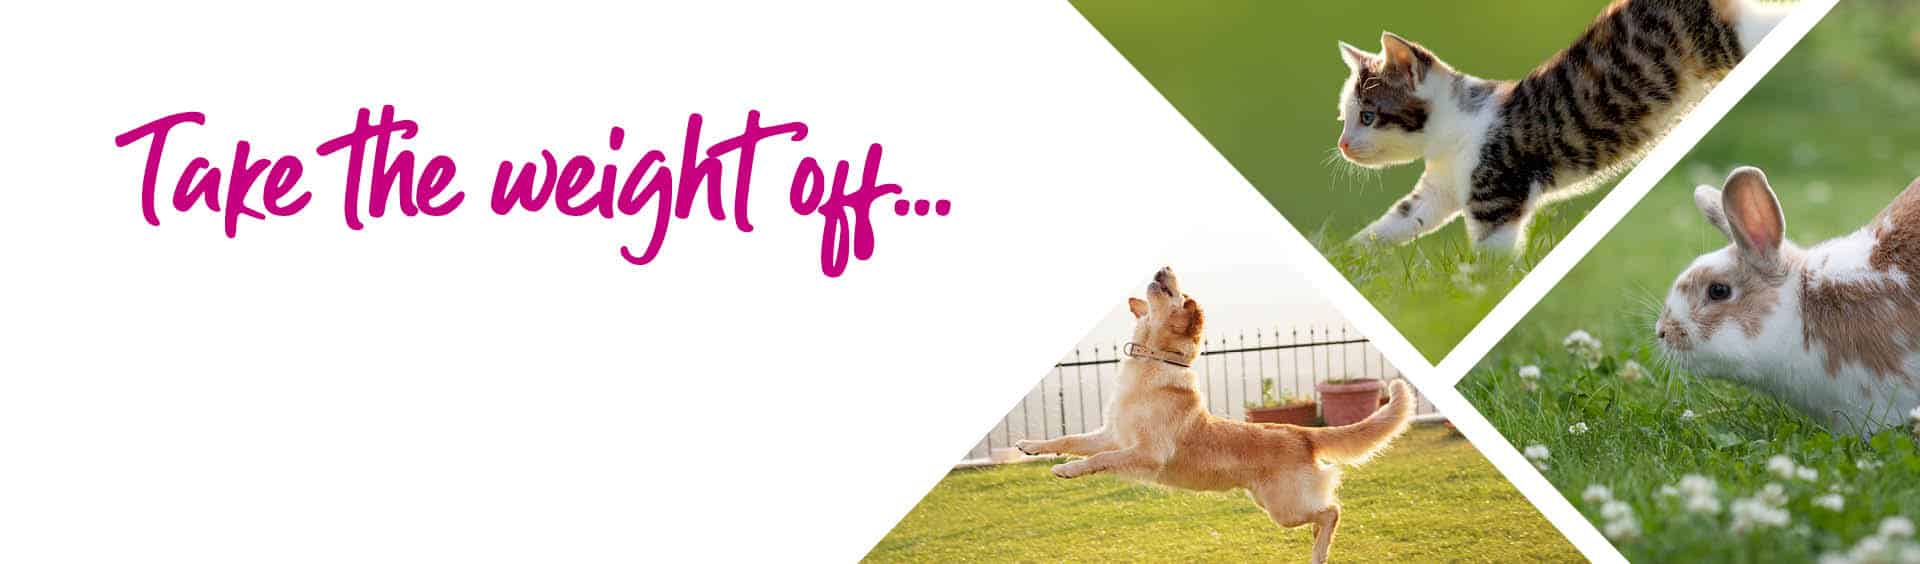 How to Help Dogs Lose Weight | Weight Management | Sandhole Vets